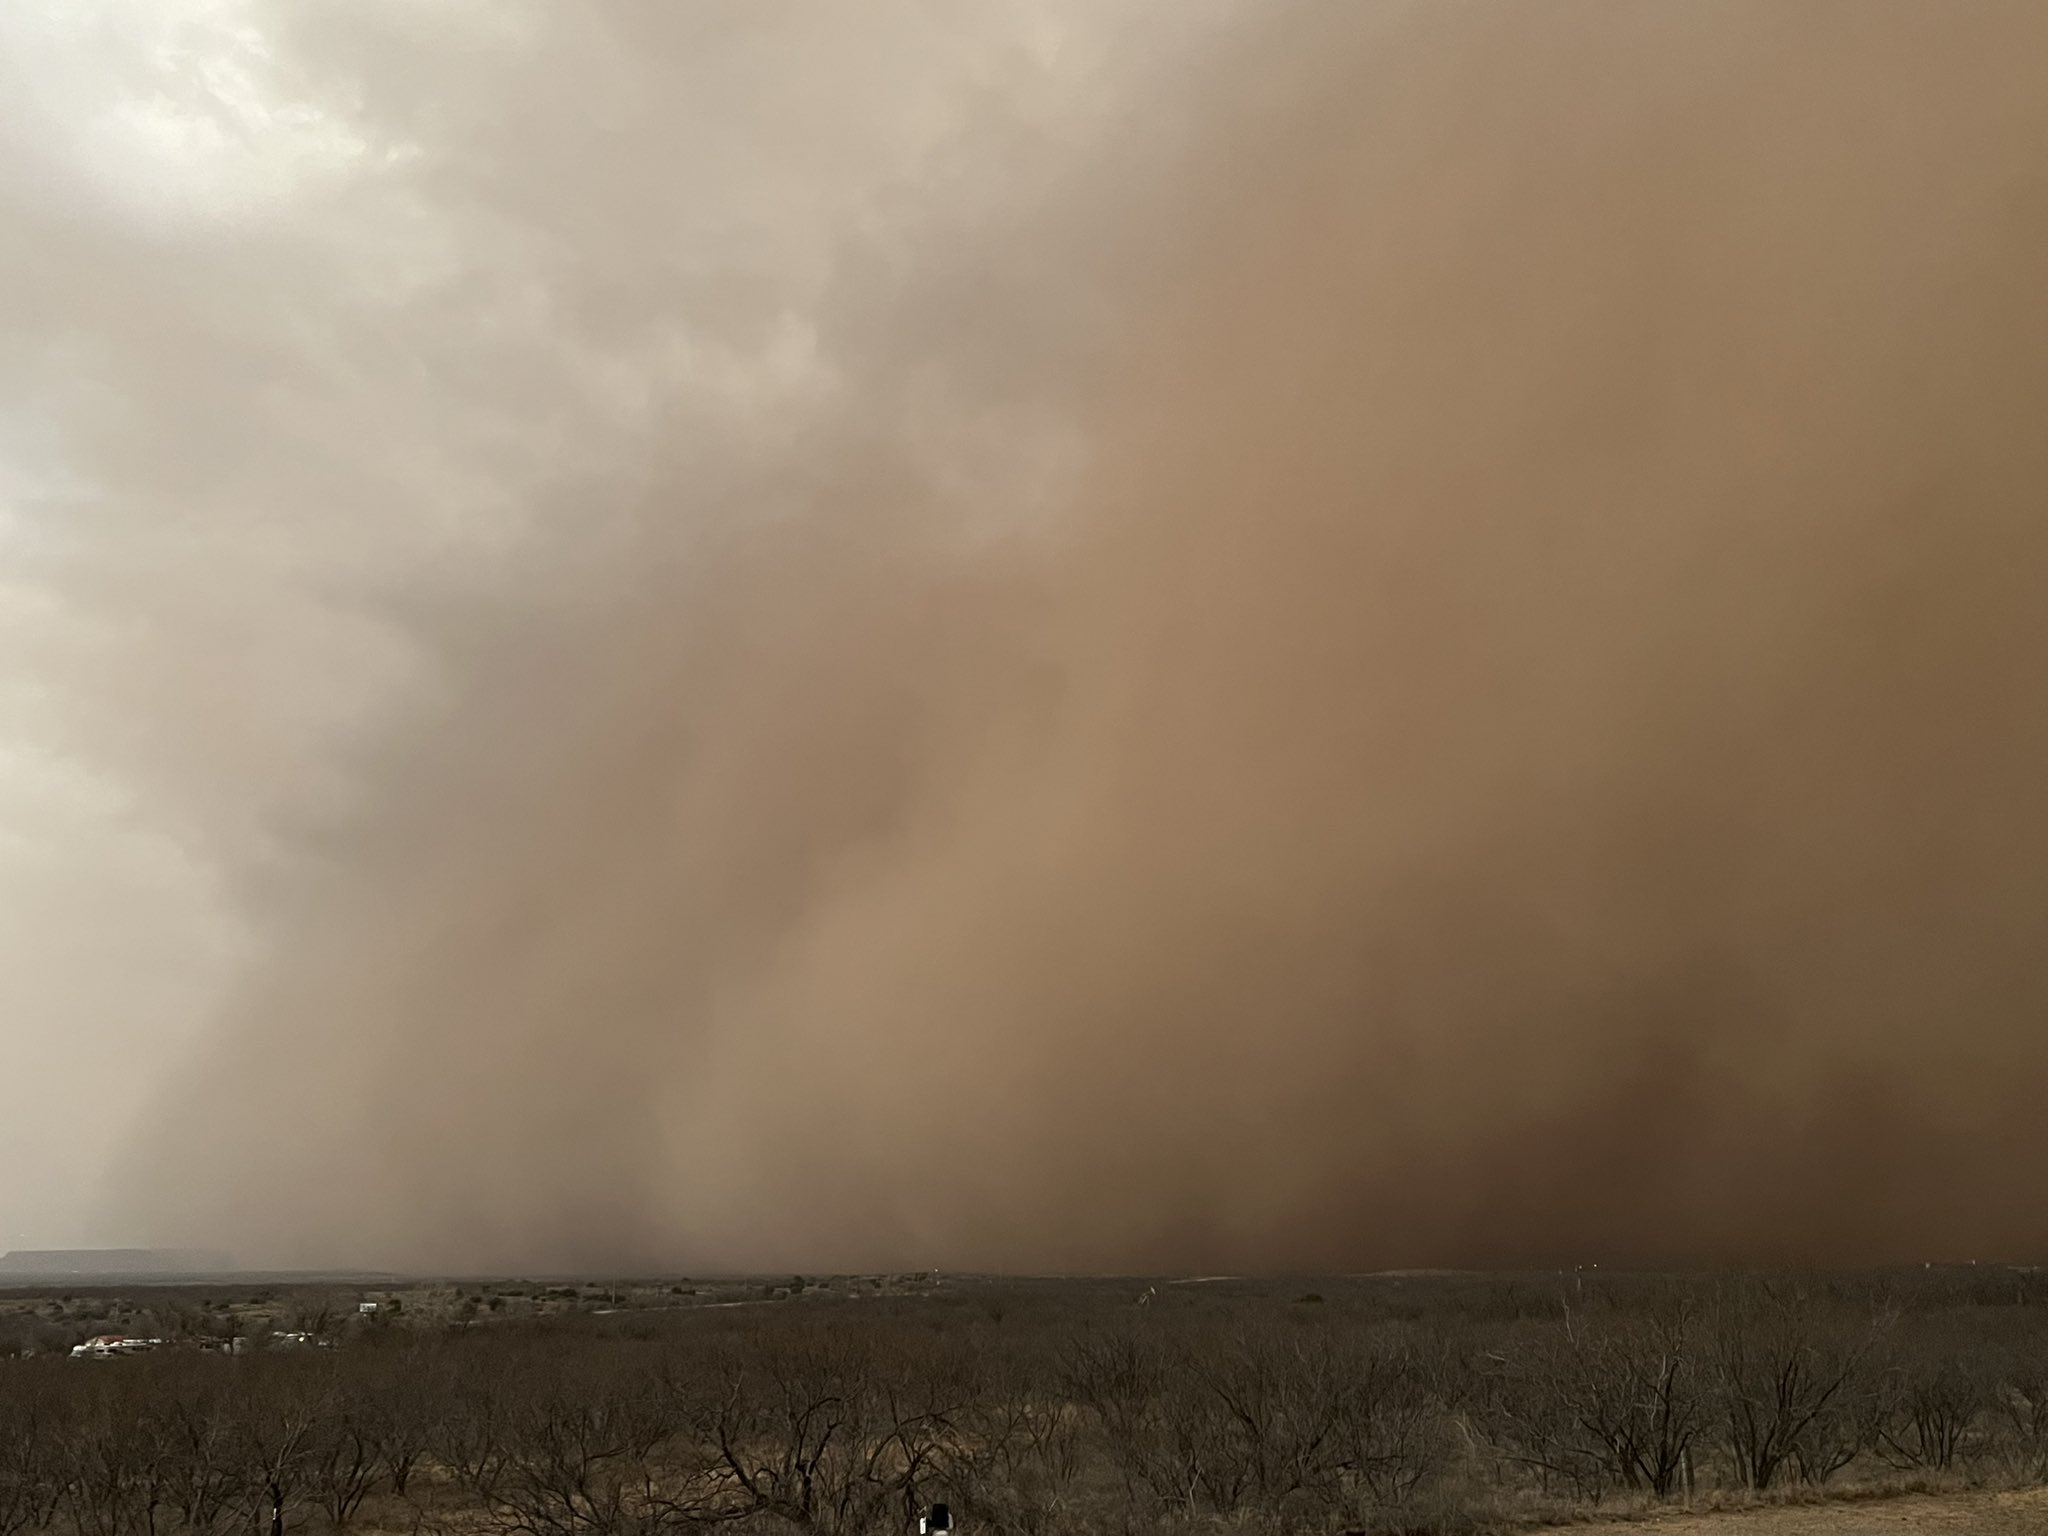 Thick blowing dust blowing approaching Lake Alan Henry Sunday evening (26 February 2023). The image is courtesy Lake Alan Henry Weather via Twitter.